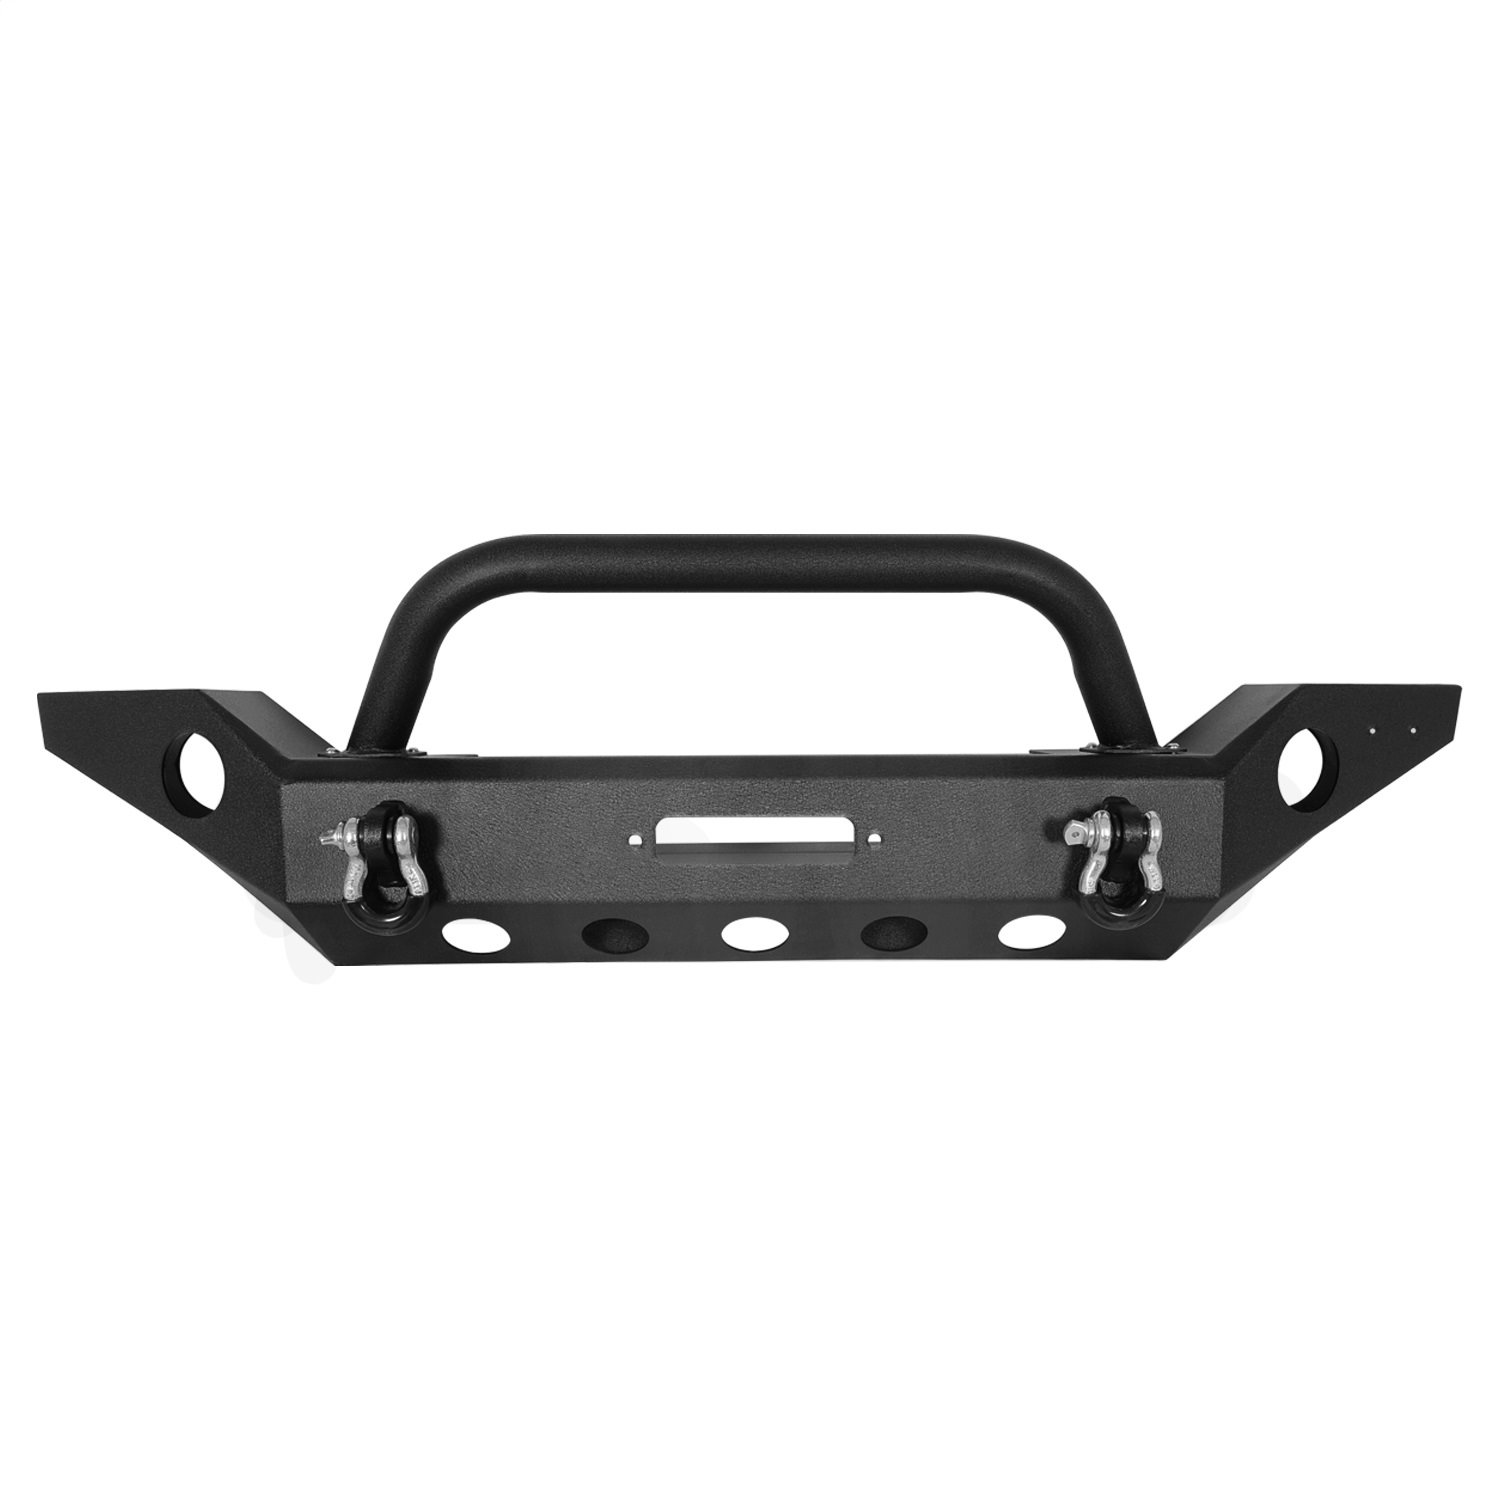 Full-Width Front Bumper with OE Fog Light Provision For 2007-2018 Jeep Wrangler JK